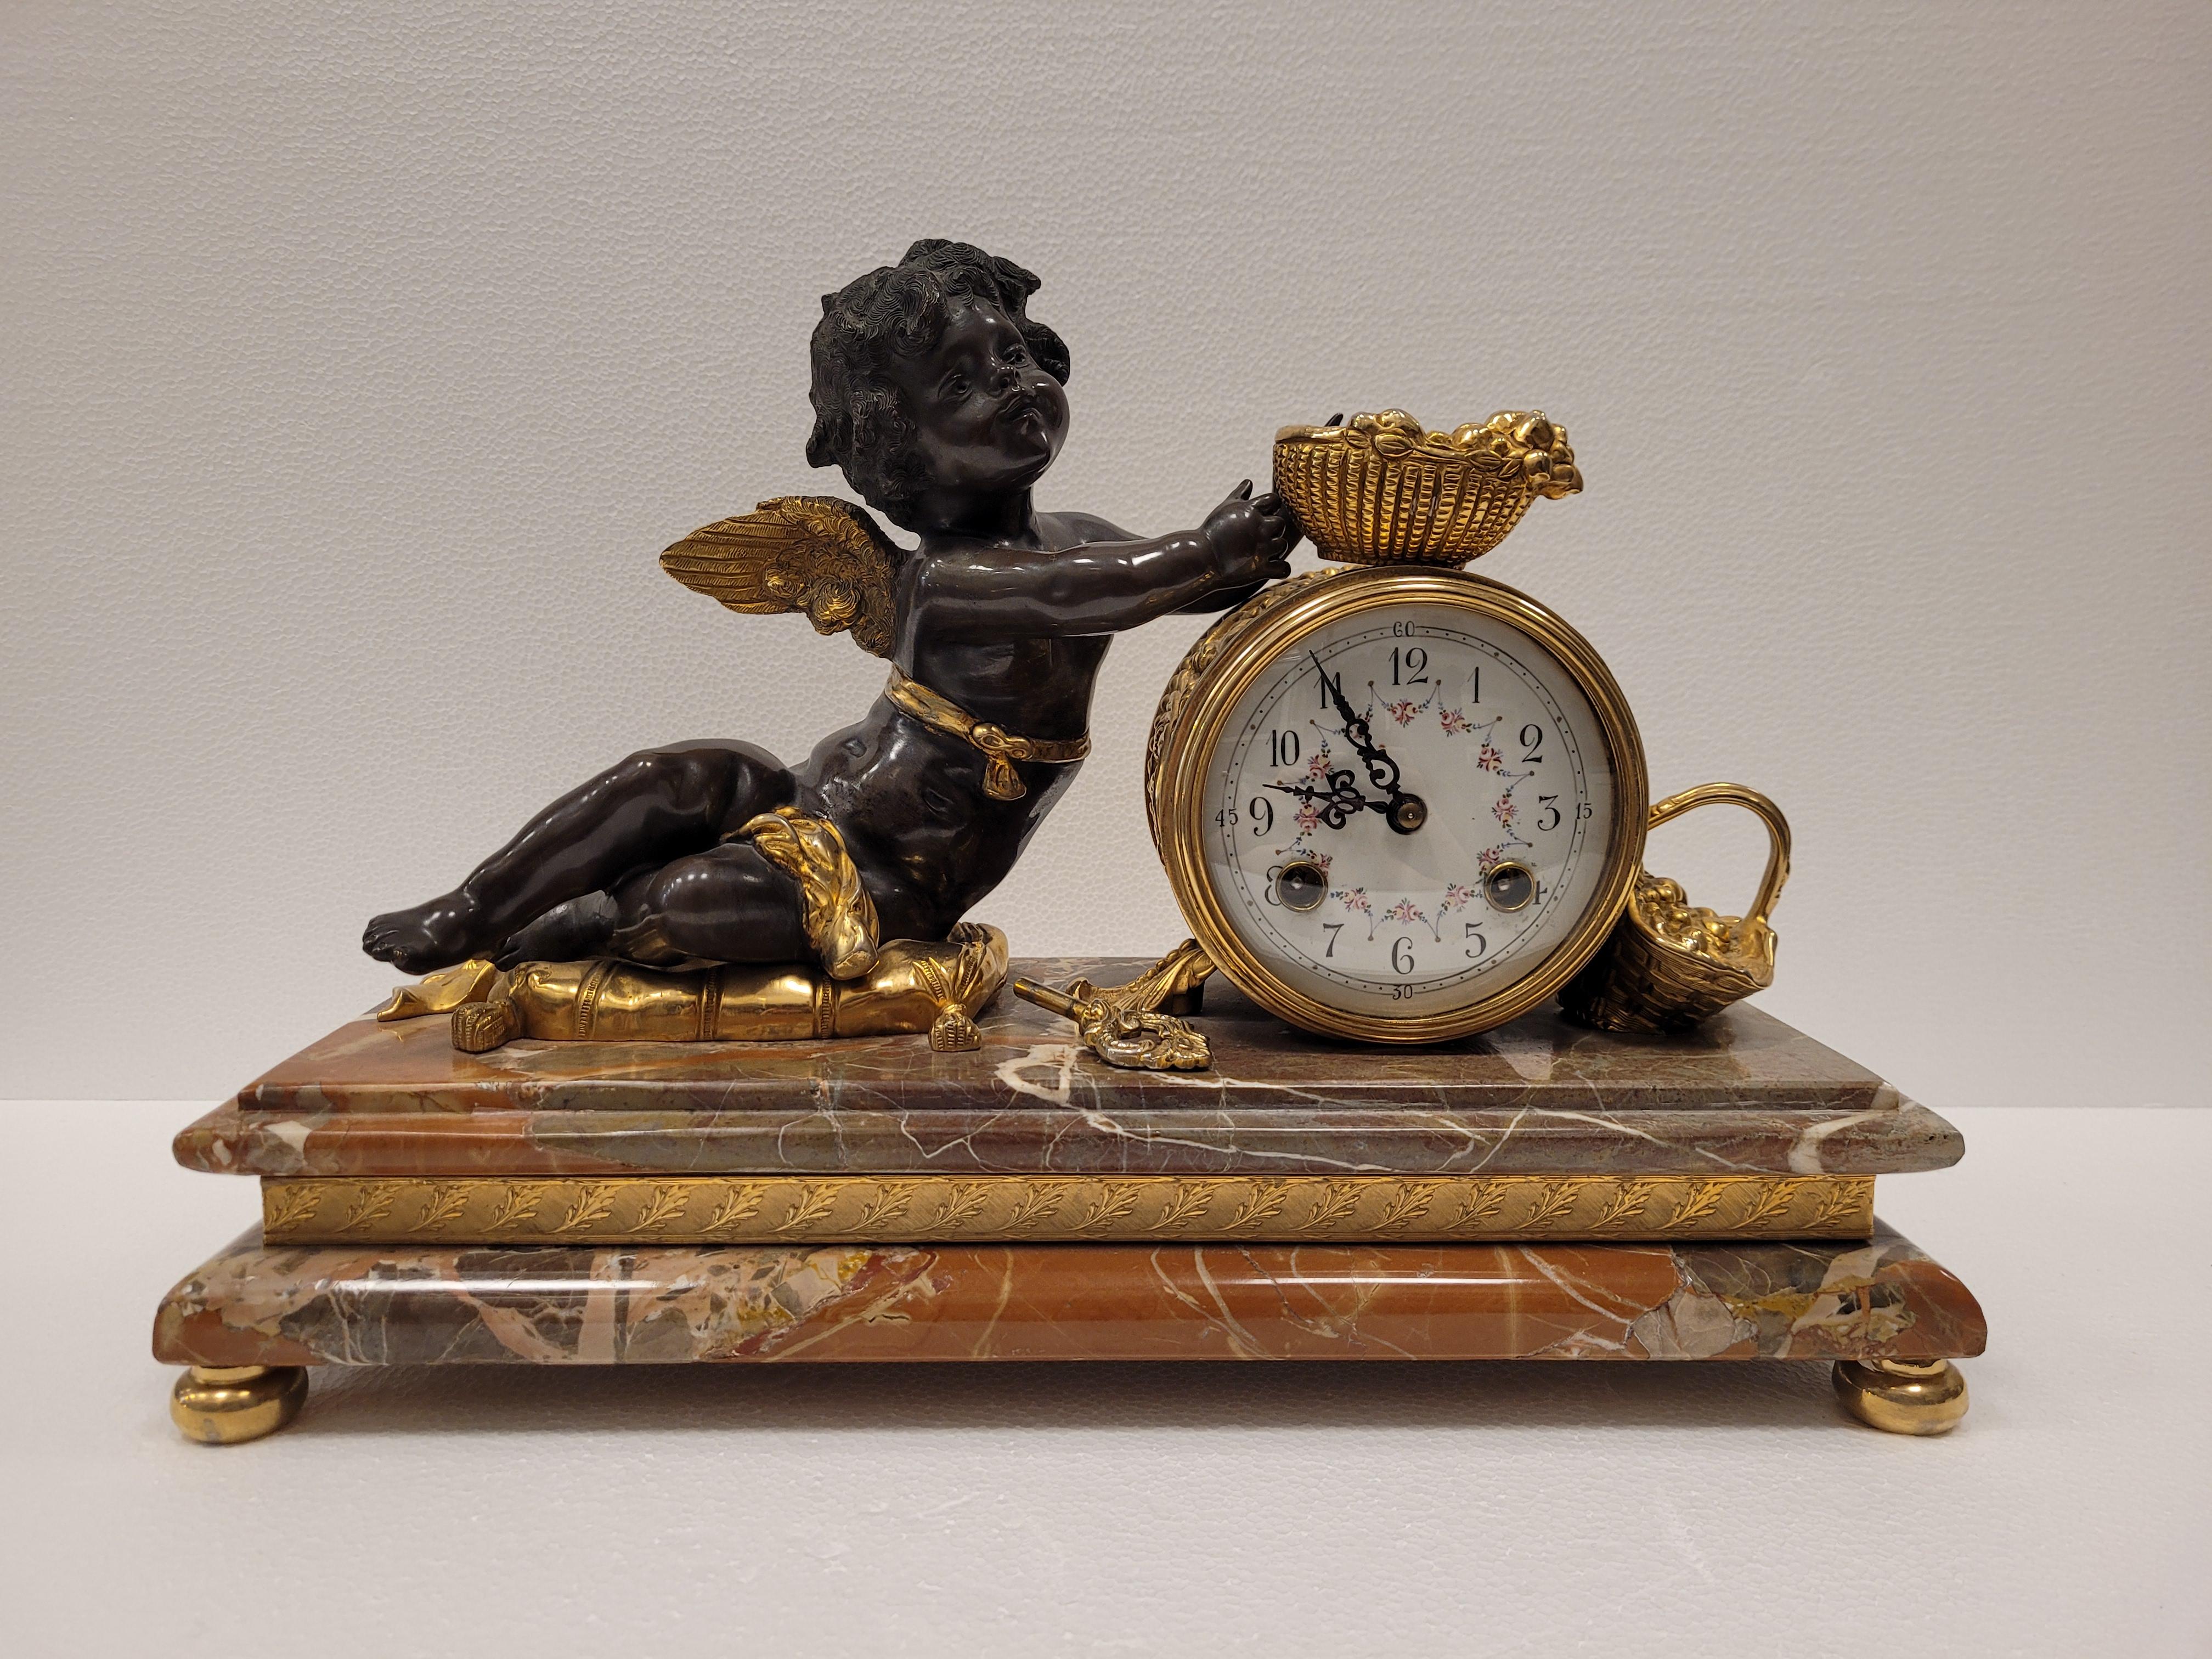 One of a kind Mantel clock in gild bronze, ormolu ,and breche marble base. It represents an angel or putti with baskets of fruit and a barrel that is the clock. Supports on a mink colored breche marble base, embellished with a chiselled golden